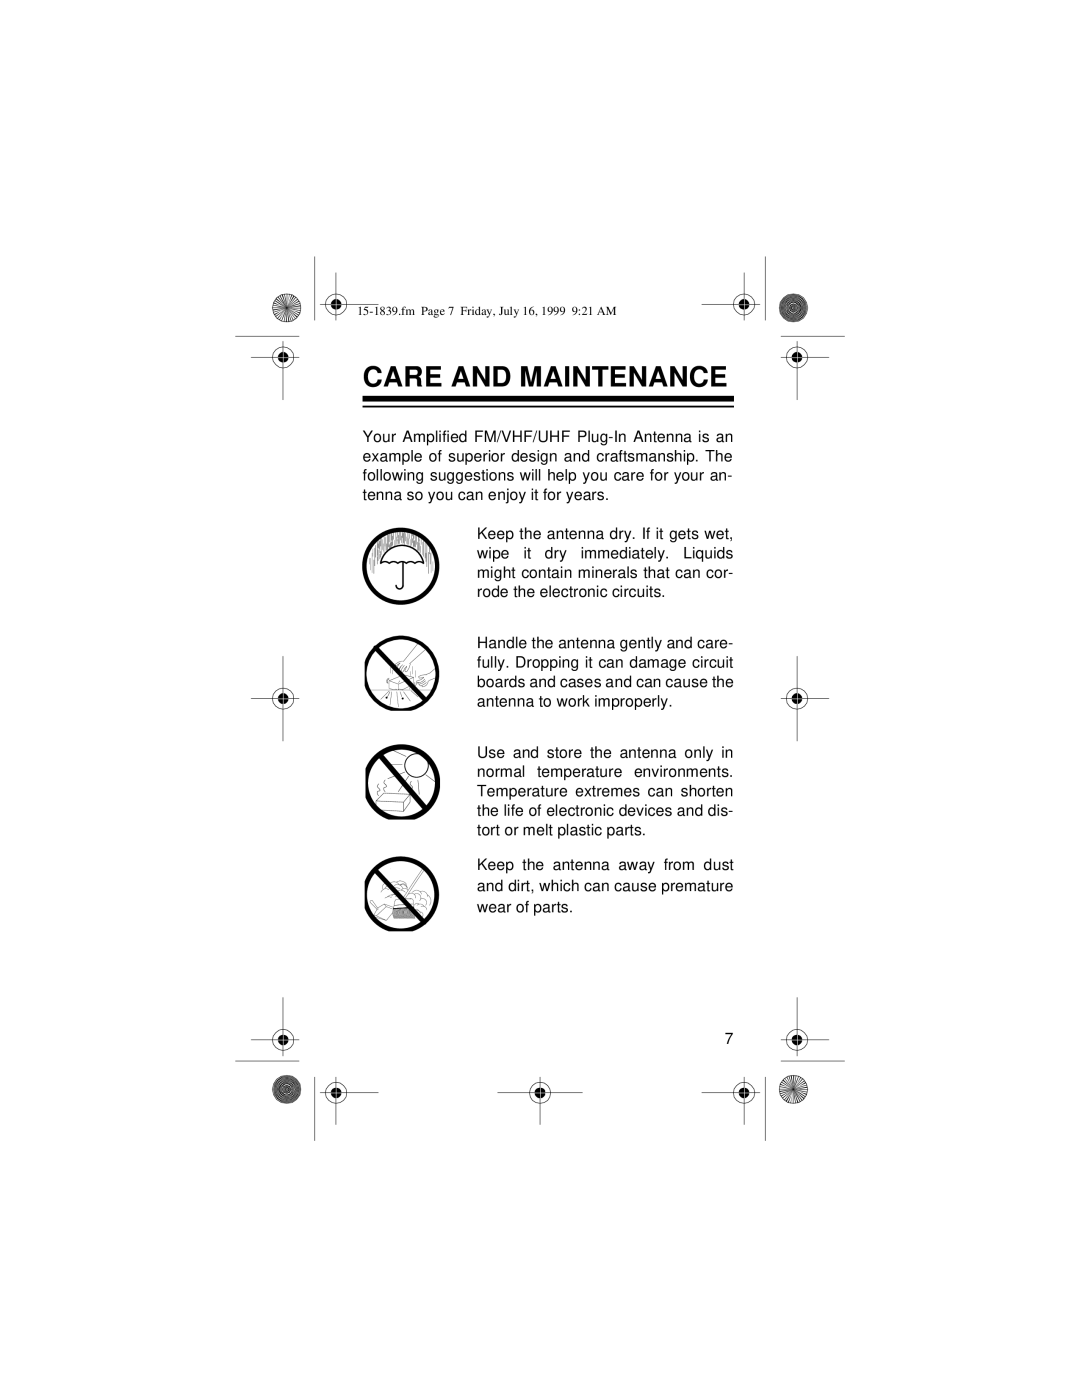 Radio Shack TV ANTENNA owner manual Care And Maintenance, fm Page 7 Friday, July 16, 1999 921 AM 